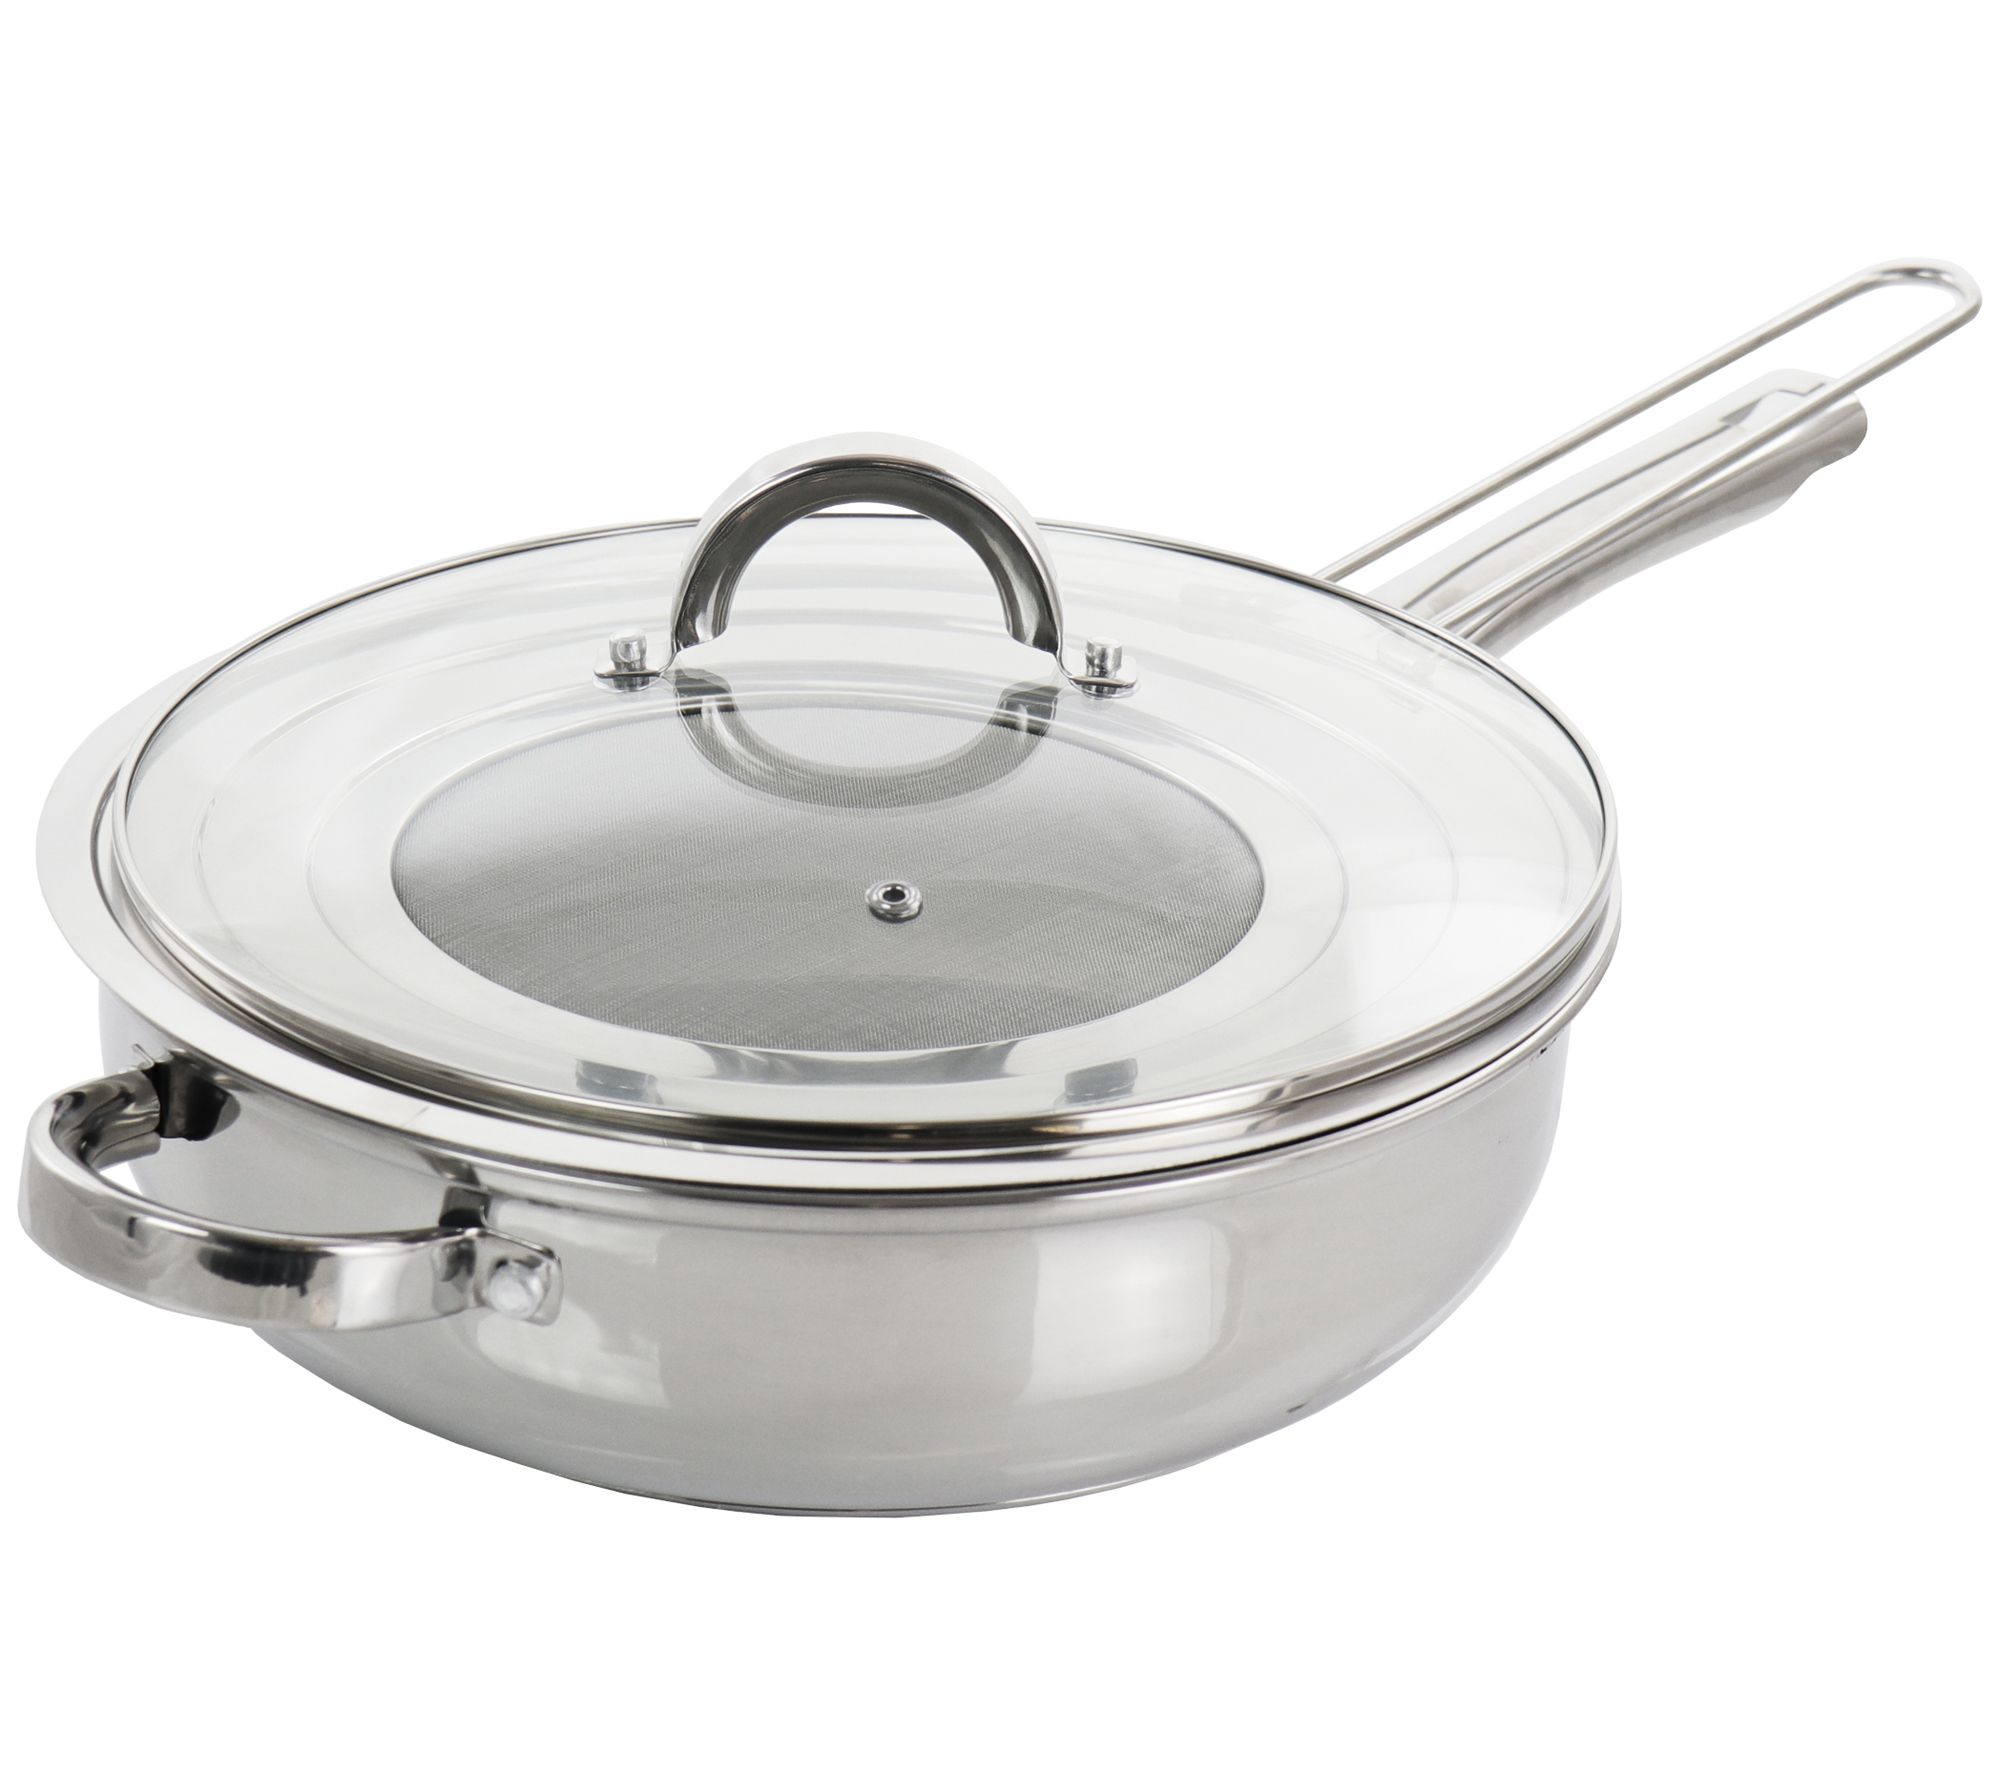 Bergner Stainlesssteel Saucepan Review (New) in English (with